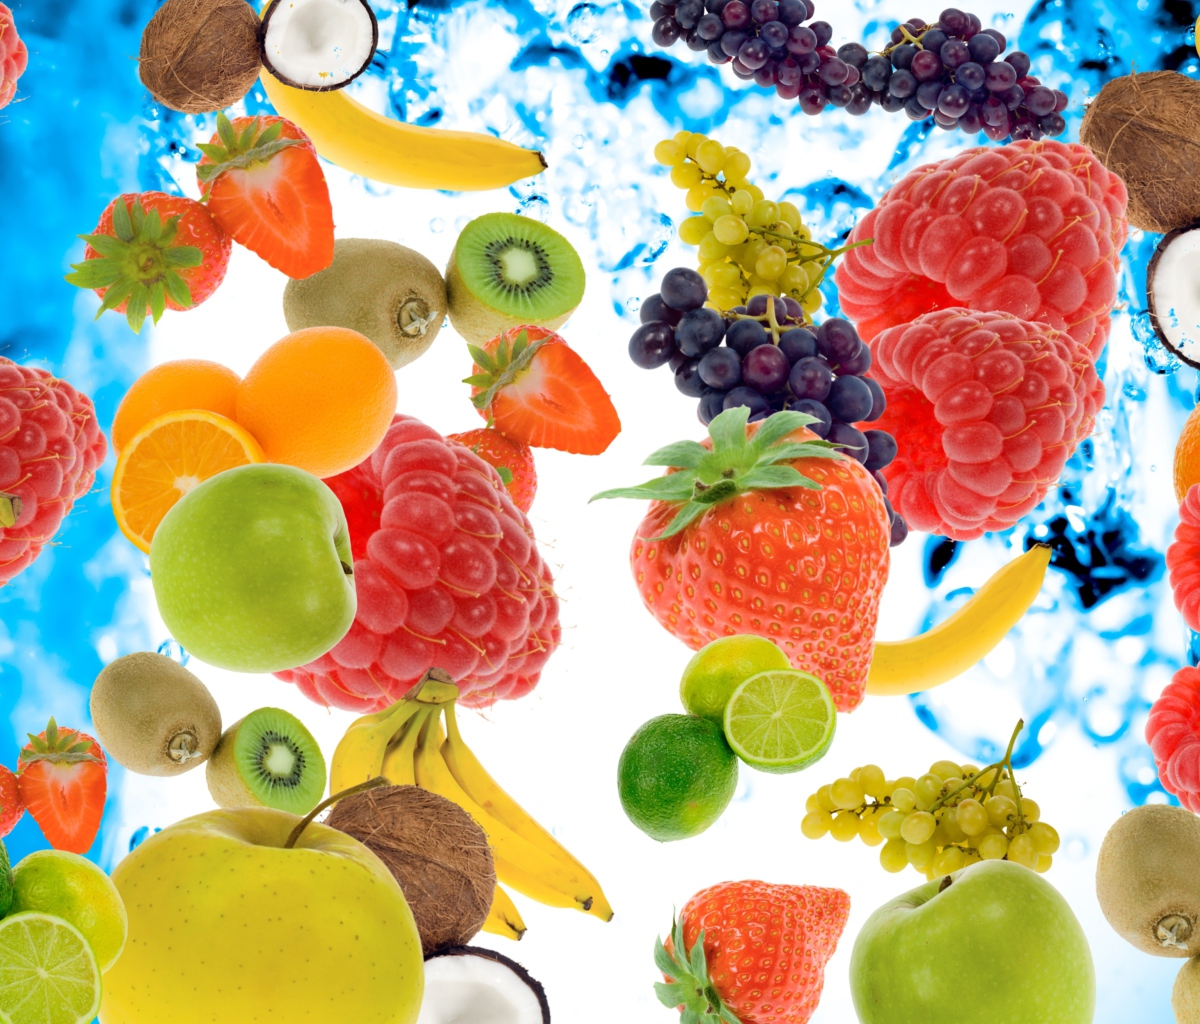 Berries And Fruits wallpaper 1200x1024